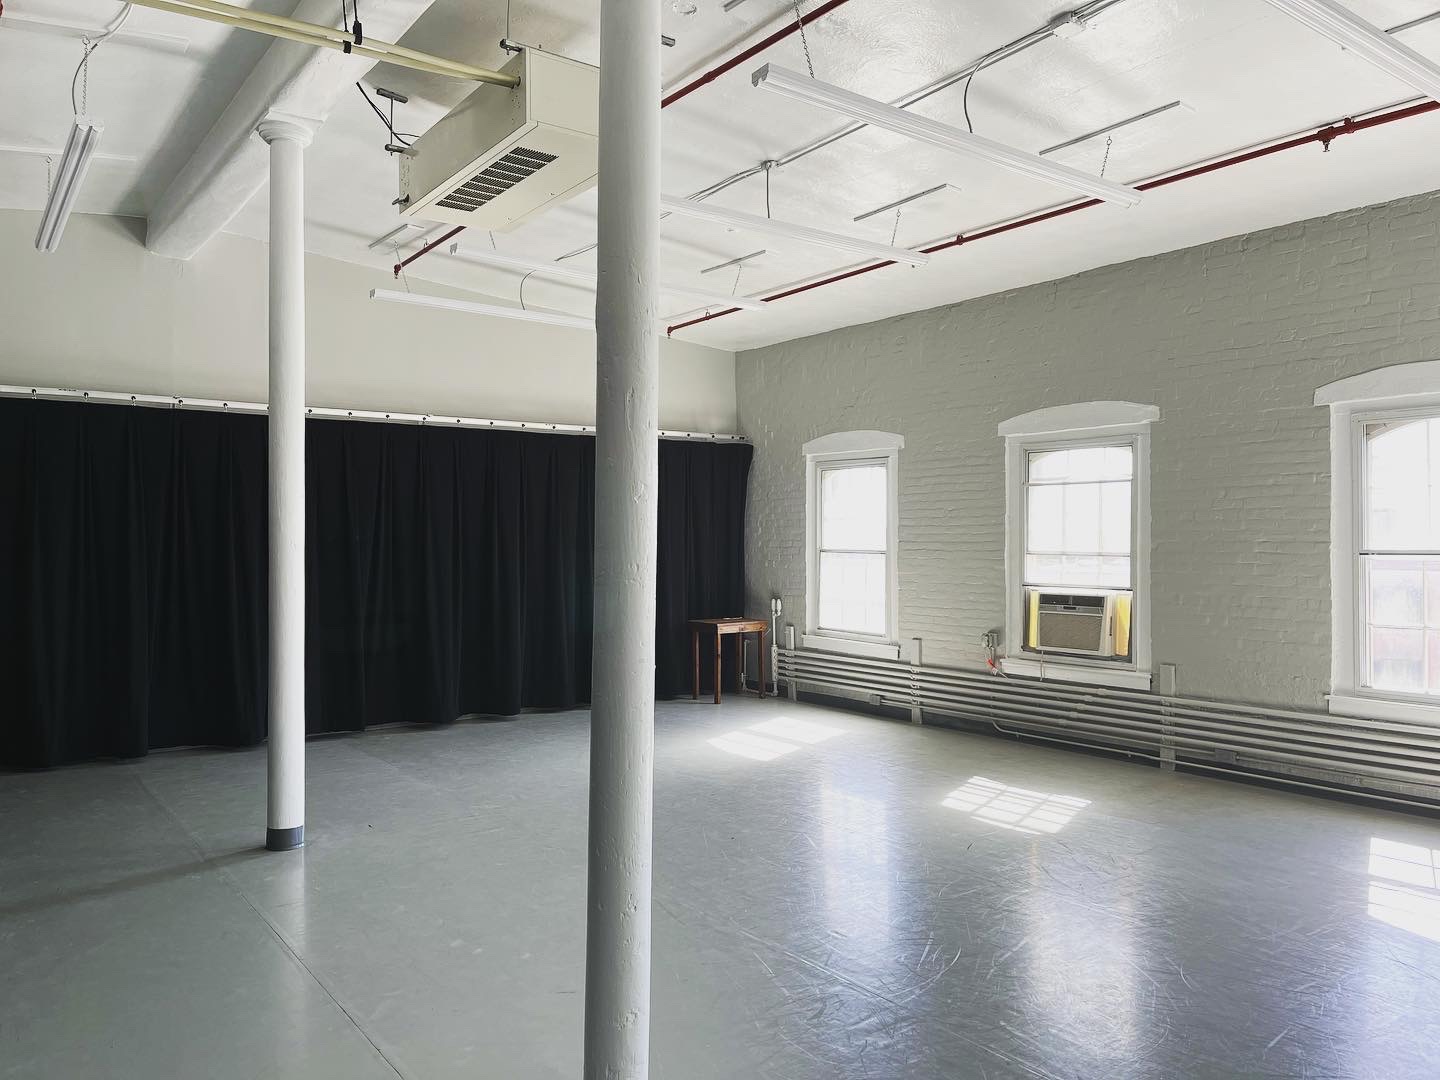 Picture of Studio 414; grey marley floor, white walls and bright windows.